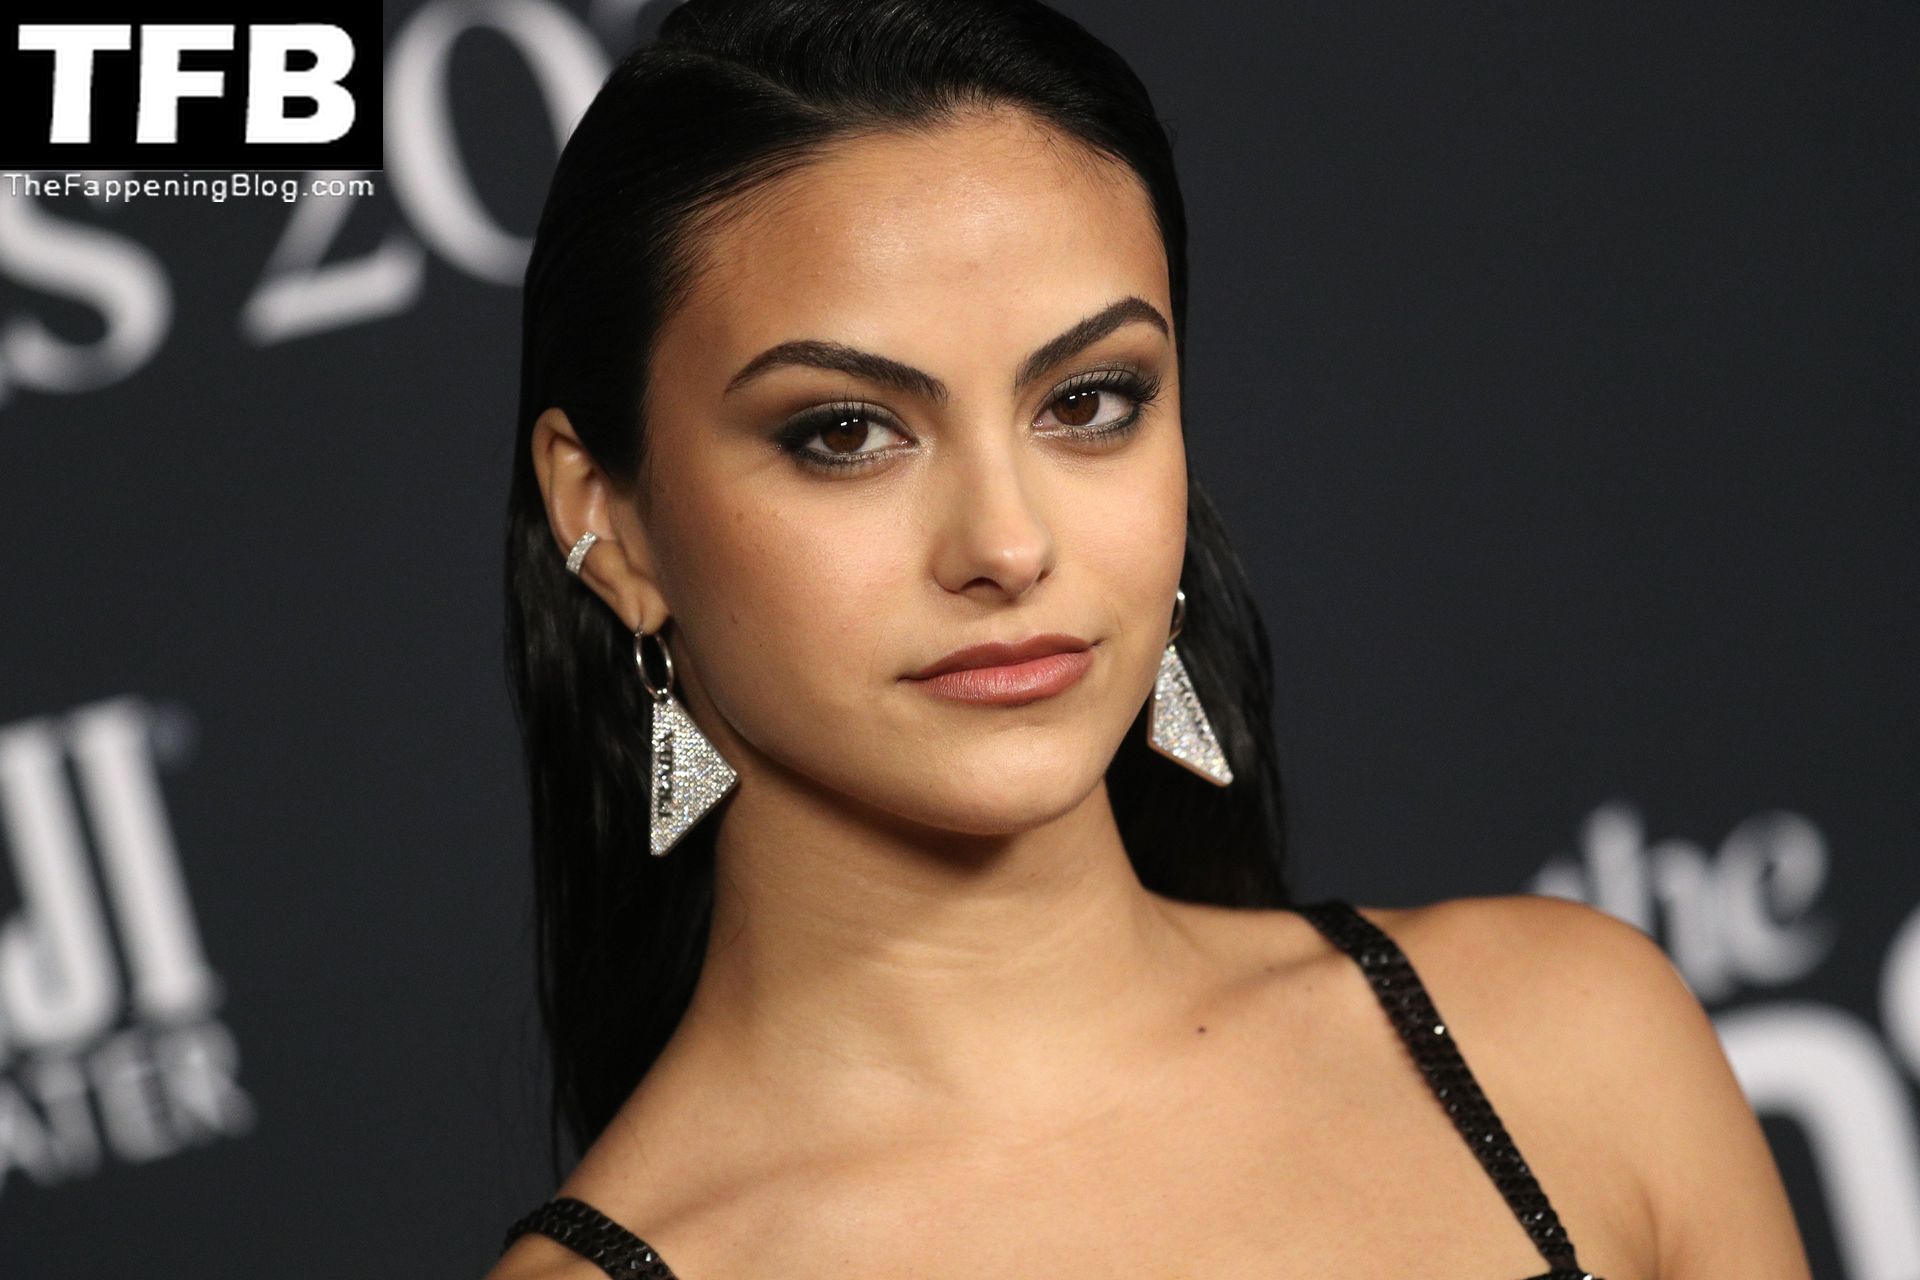 Camila-Mendes-See-Through-Tits-The-Fappening-Blog-80.jpg